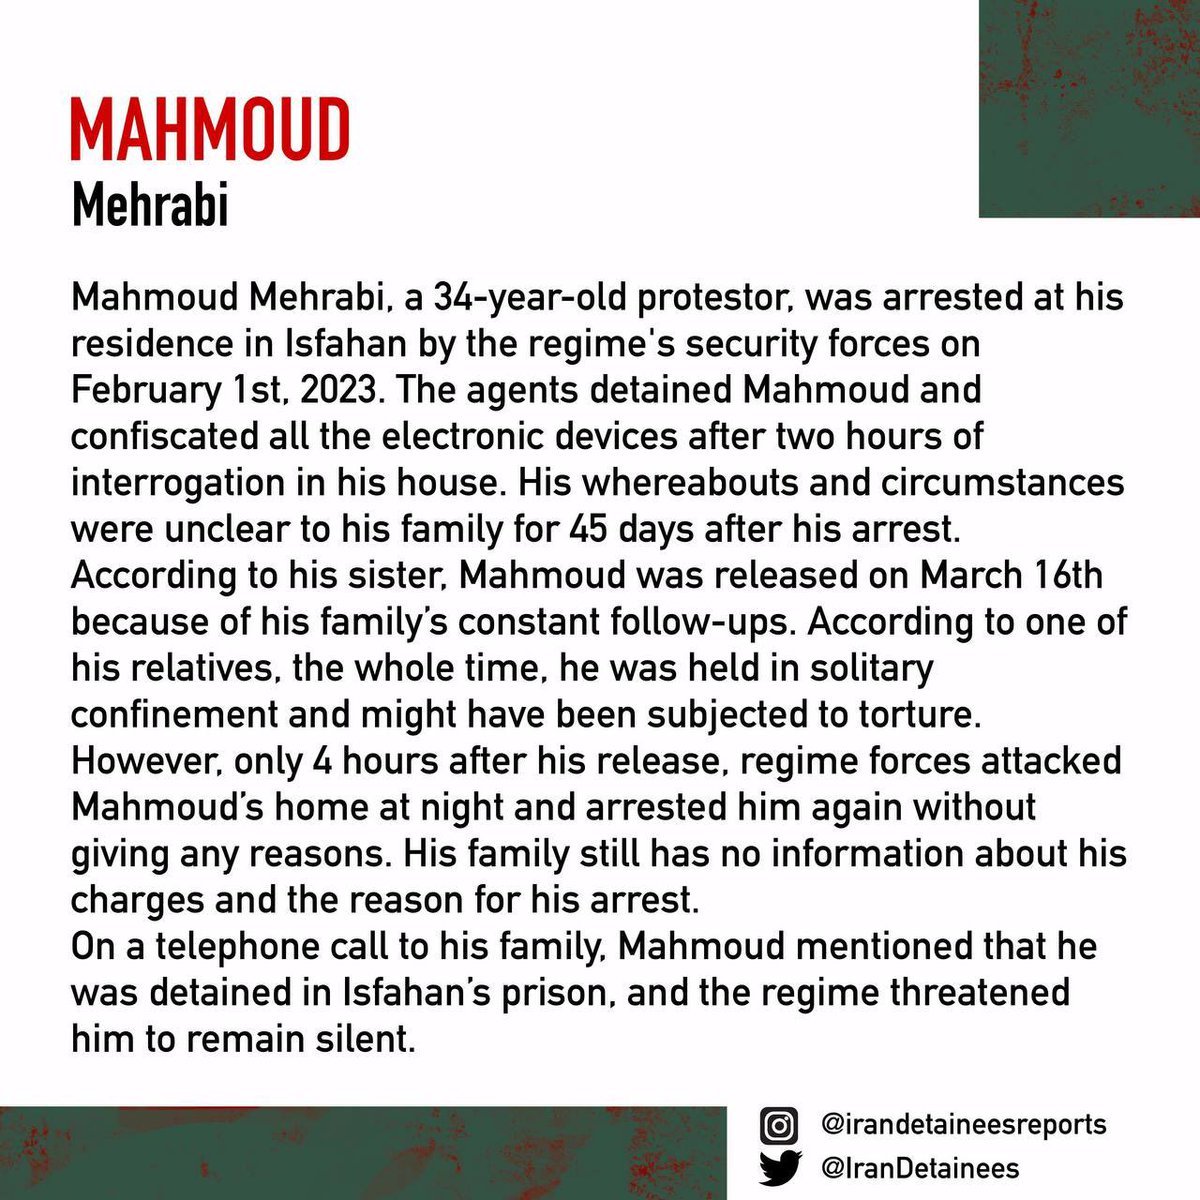 To the Free World: 
Iranians suffer under a brutal regime. Their peaceful protests are met with violence, torture, and death. Mahmoud Mehrabi is one of many, arrested by the IRGC, and facing imminent danger. 

Stand up, be their voice! 

#MahmoudMehrabi #محمود_مهرابی #مهسا_امينی